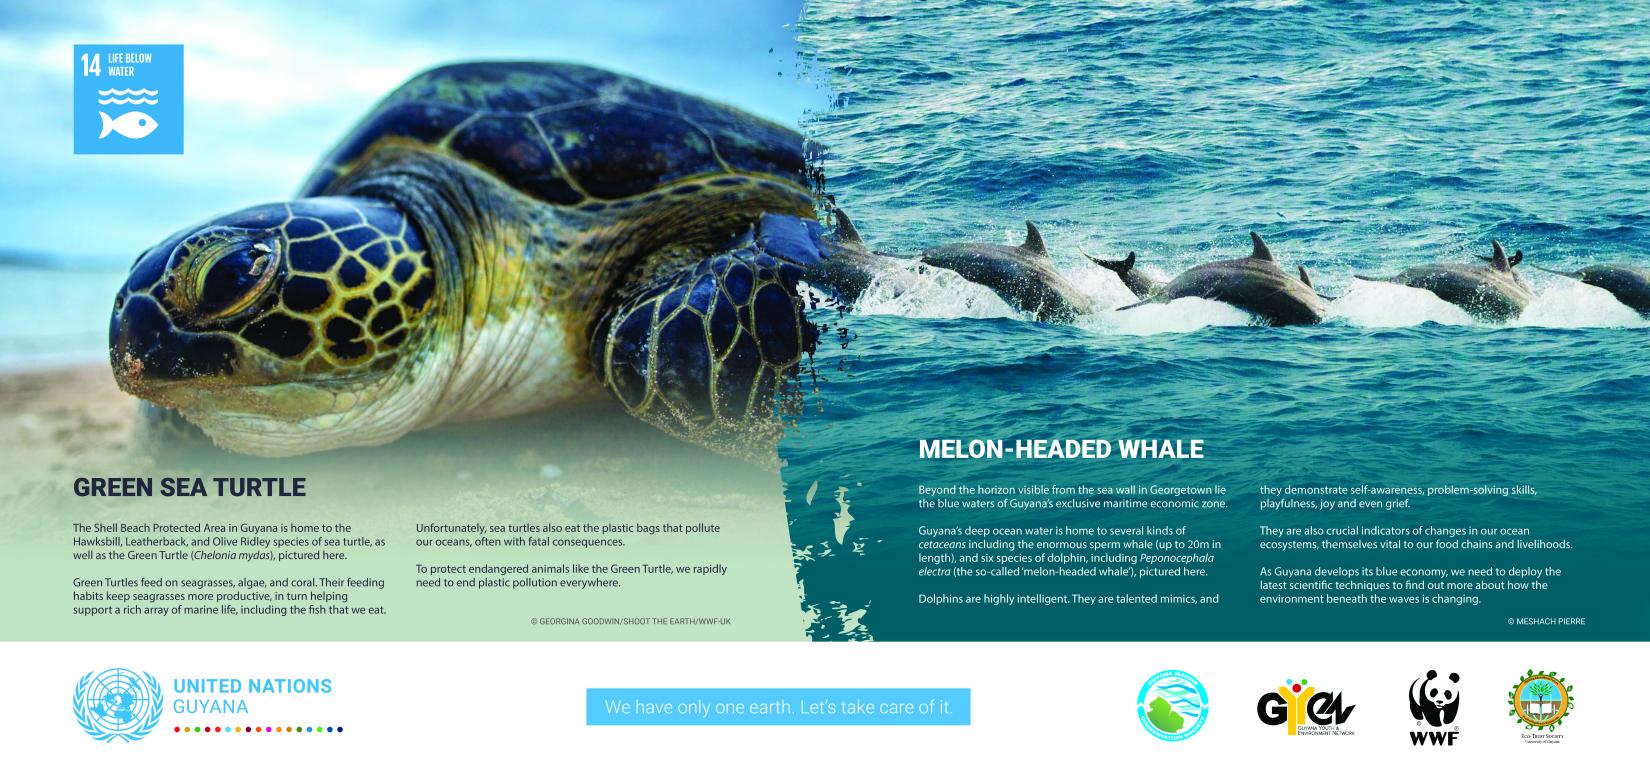 The Green Sea Turtle and the Melon-Headed Whale